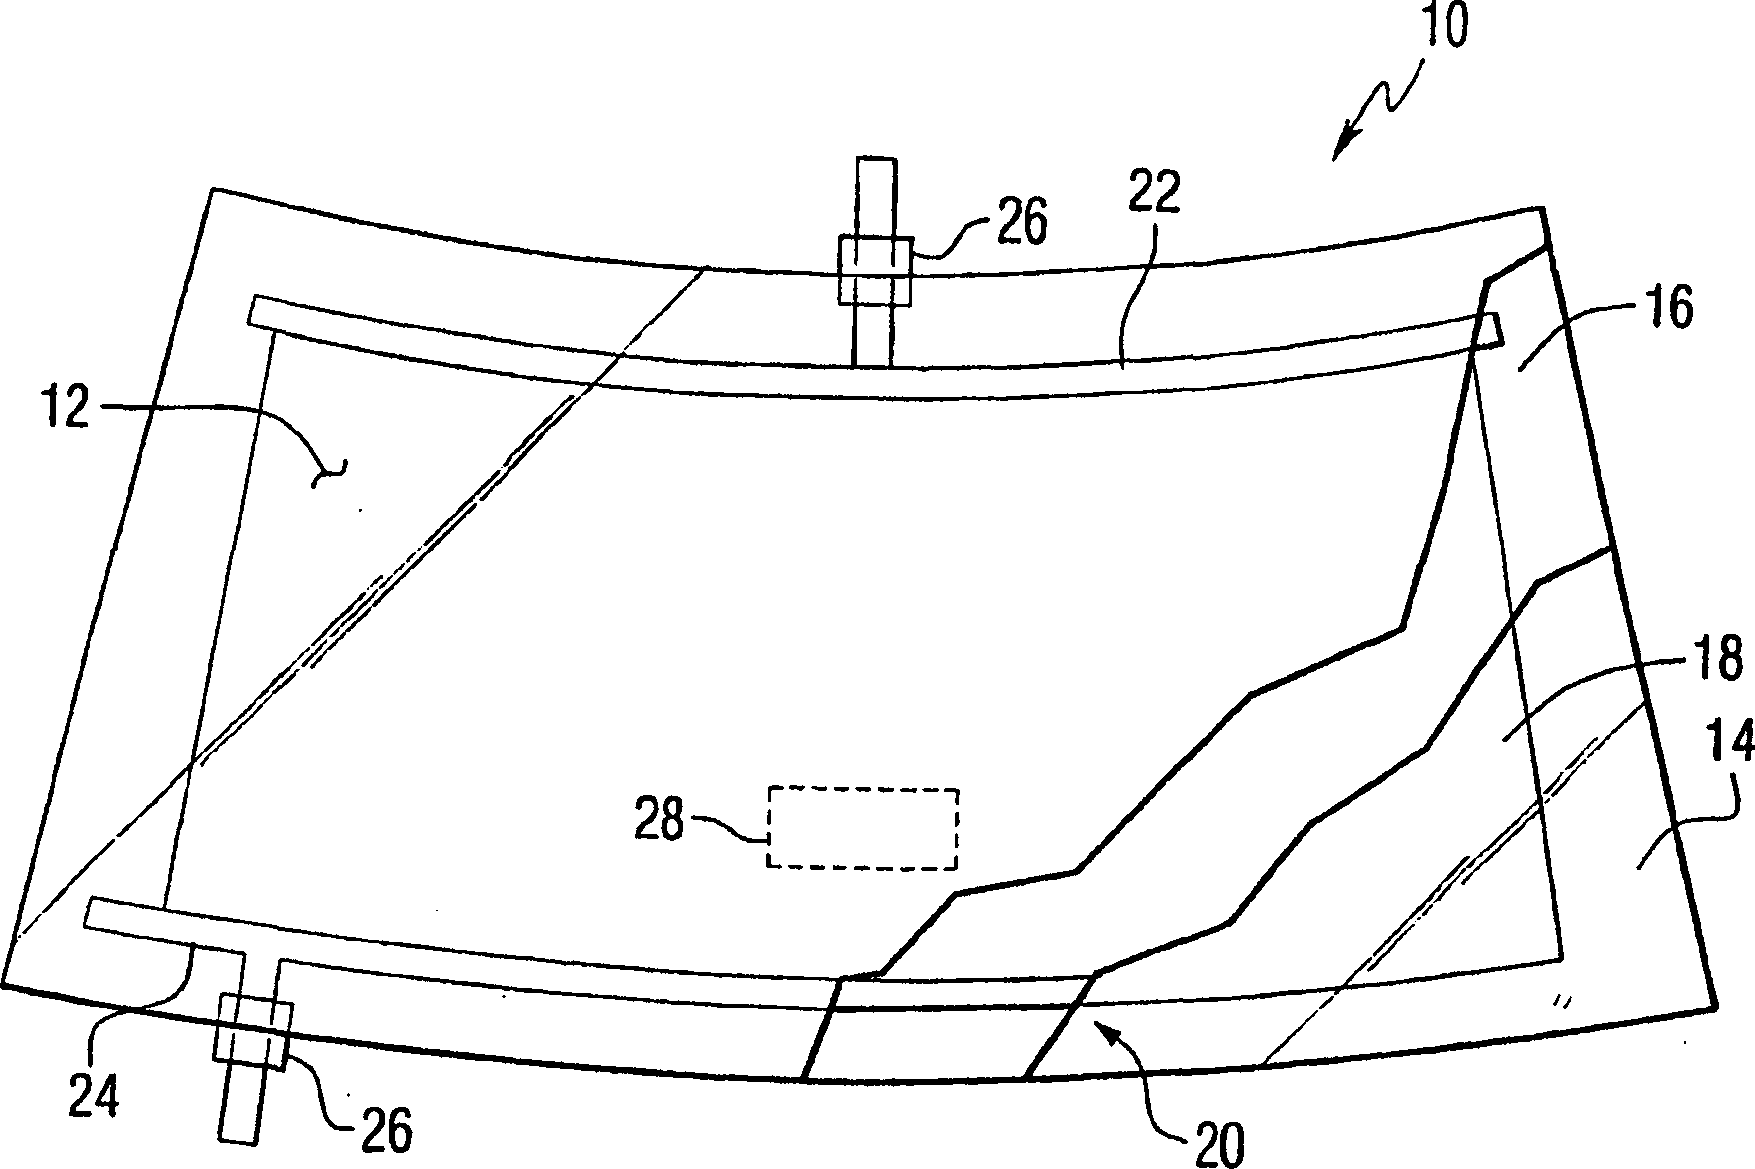 Conductive frequency selective surface utilizing arc and line elements